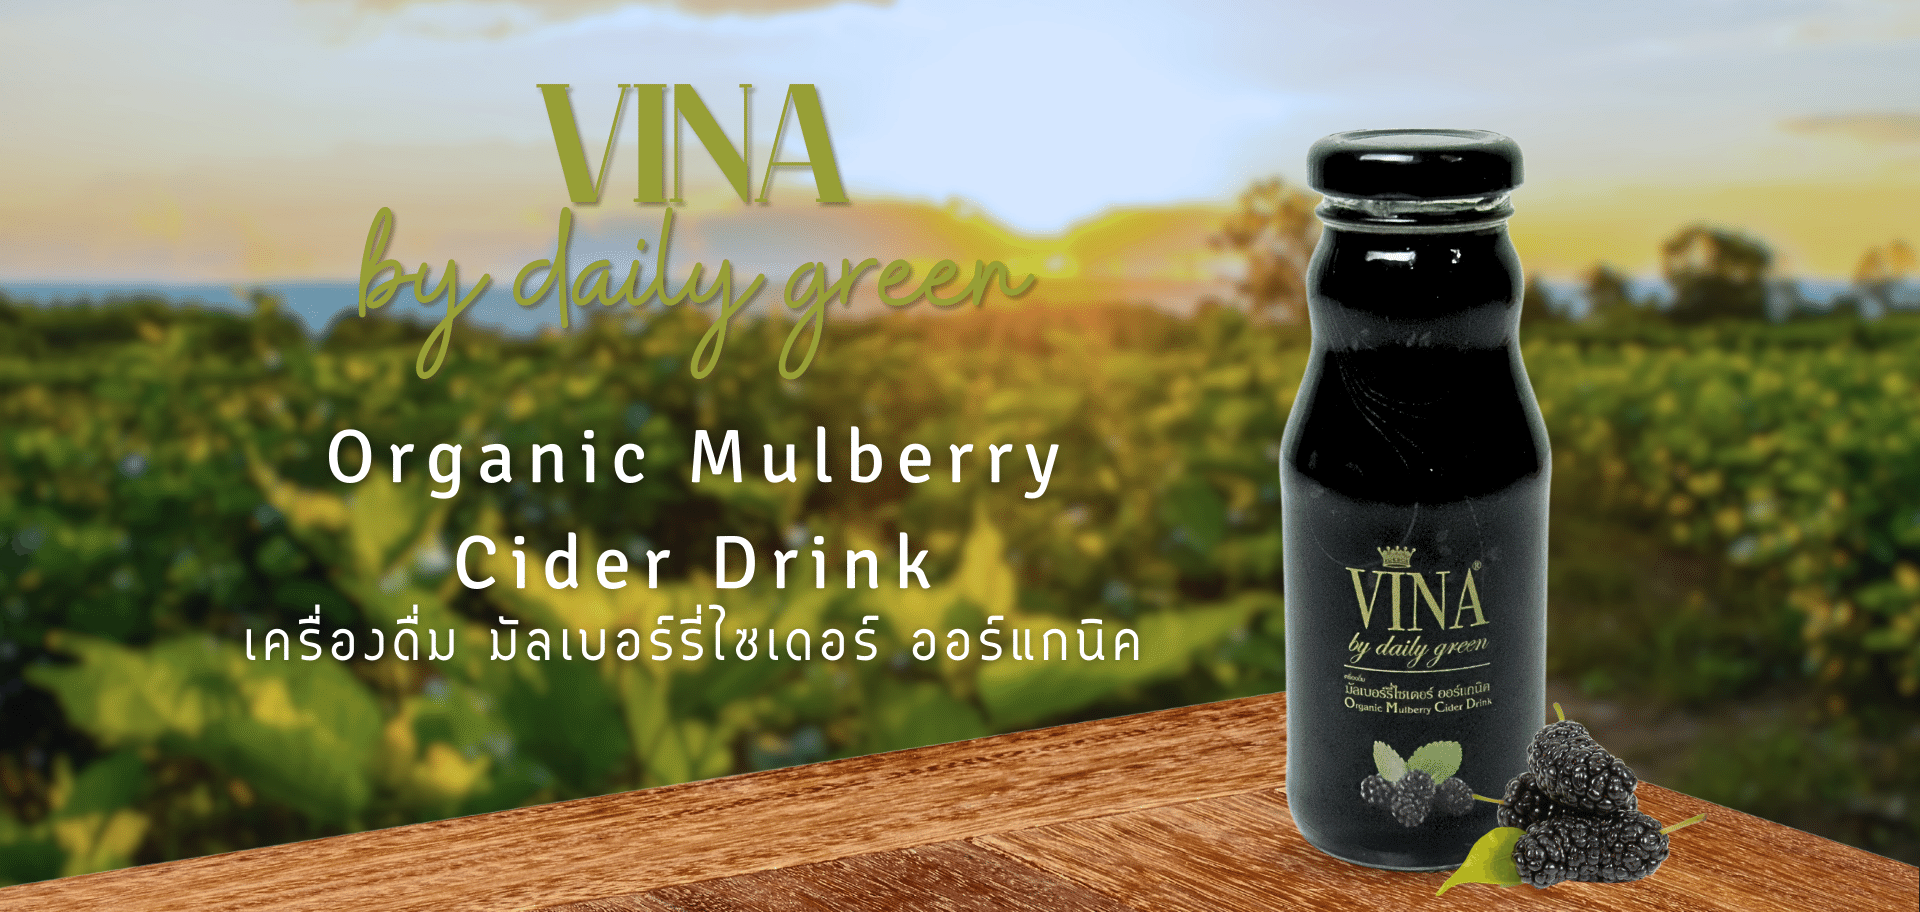 Coverpage Vina mulberry cider